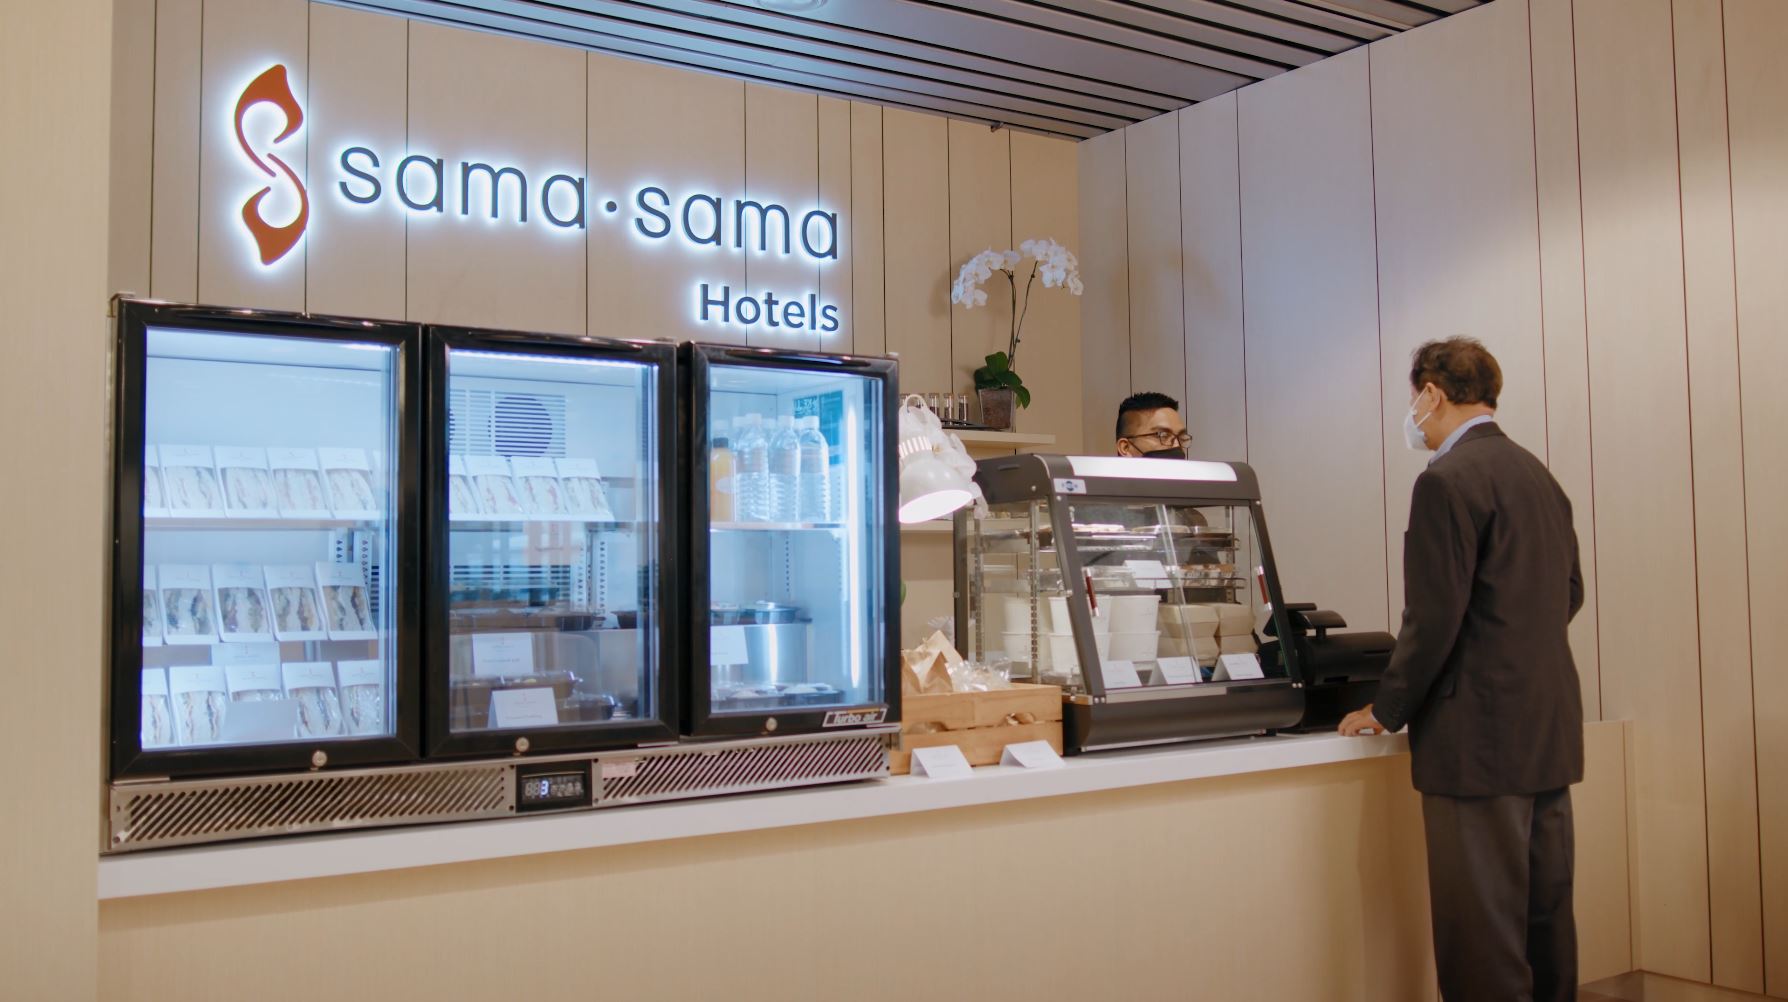 A food and beverage kiosk operated by Sama Sama Hotel at the waiting lounge.